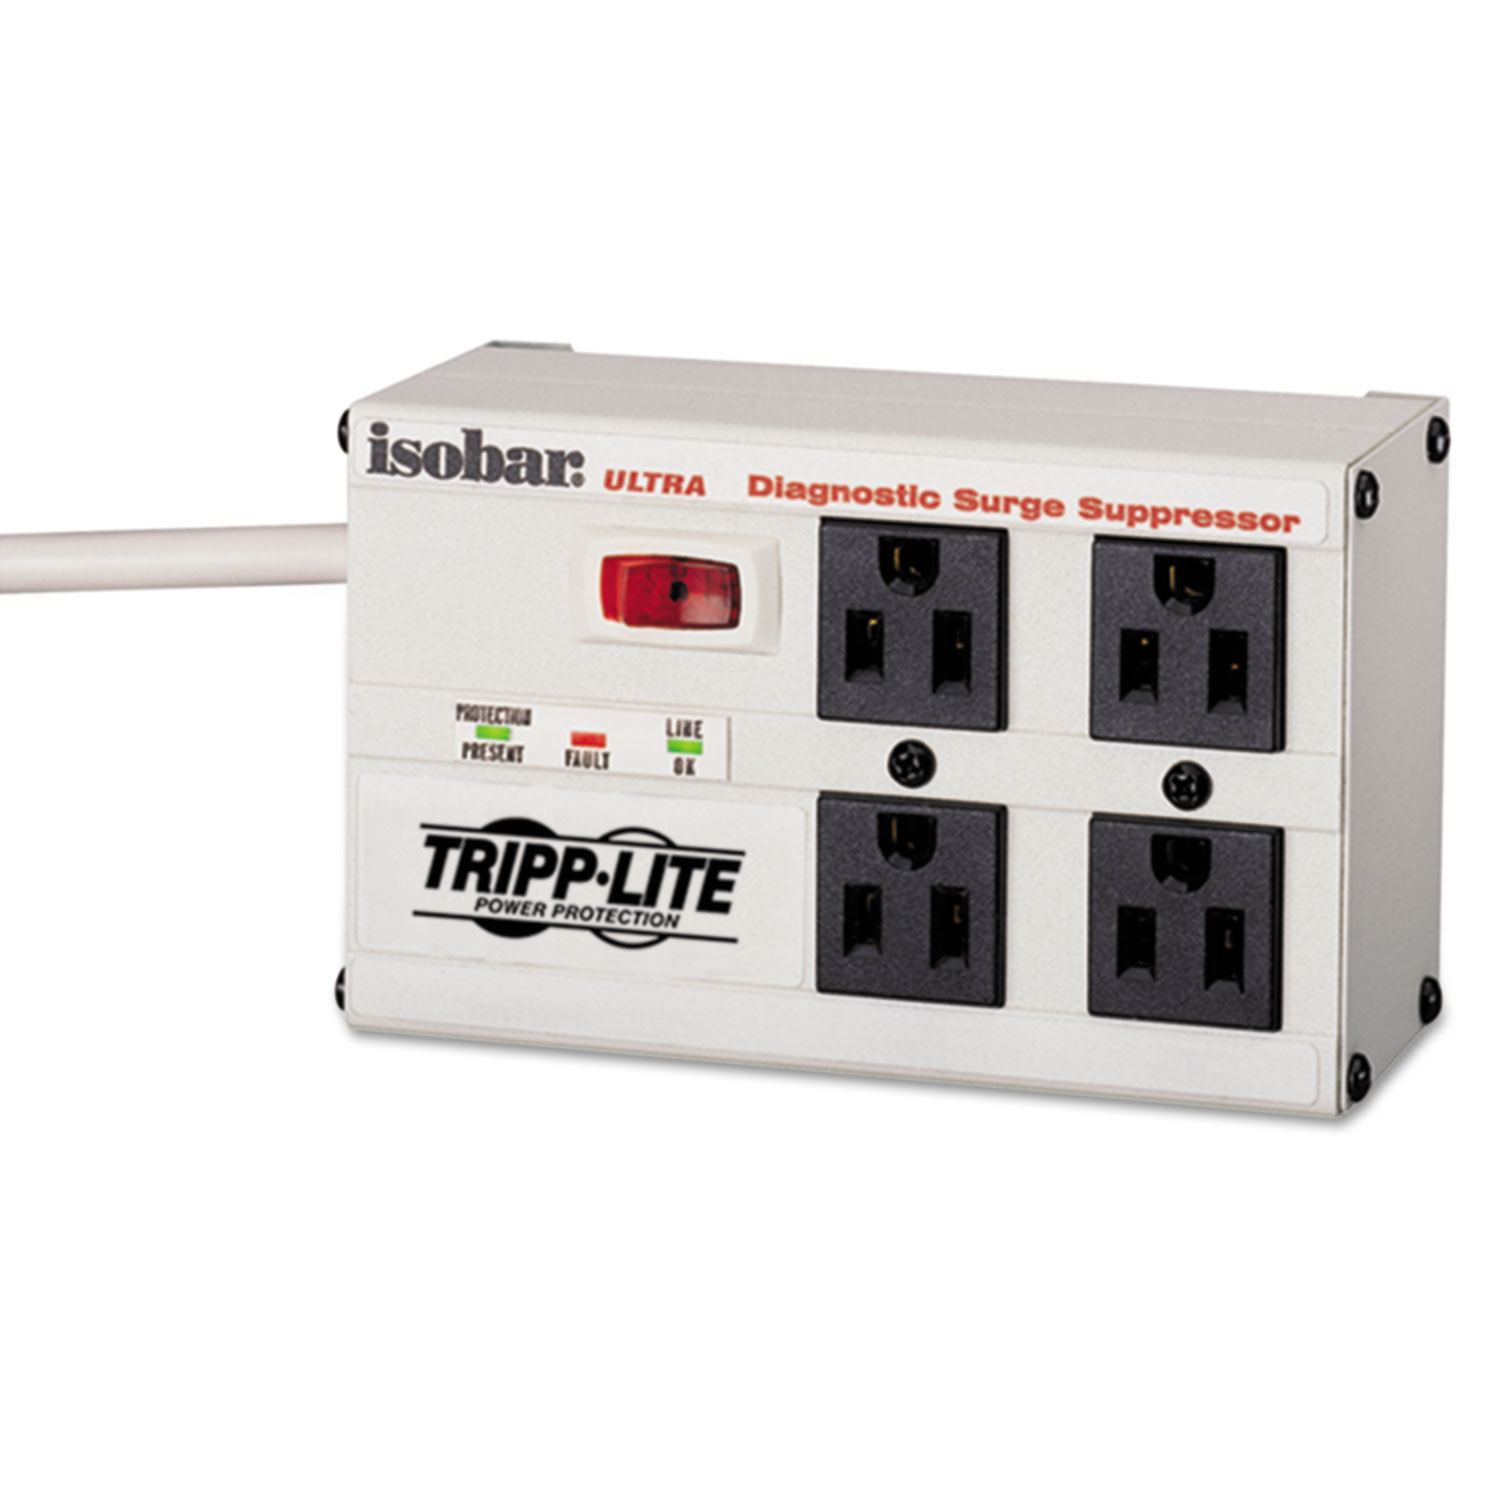  Tripp Lite ISOBAR4 ULTRA Isobar Surge Protector, 4 Outlets, 6 ft. Cord, 3330 Joules, Diagnostic LEDs (TRPISOBAR4ULTRA) 